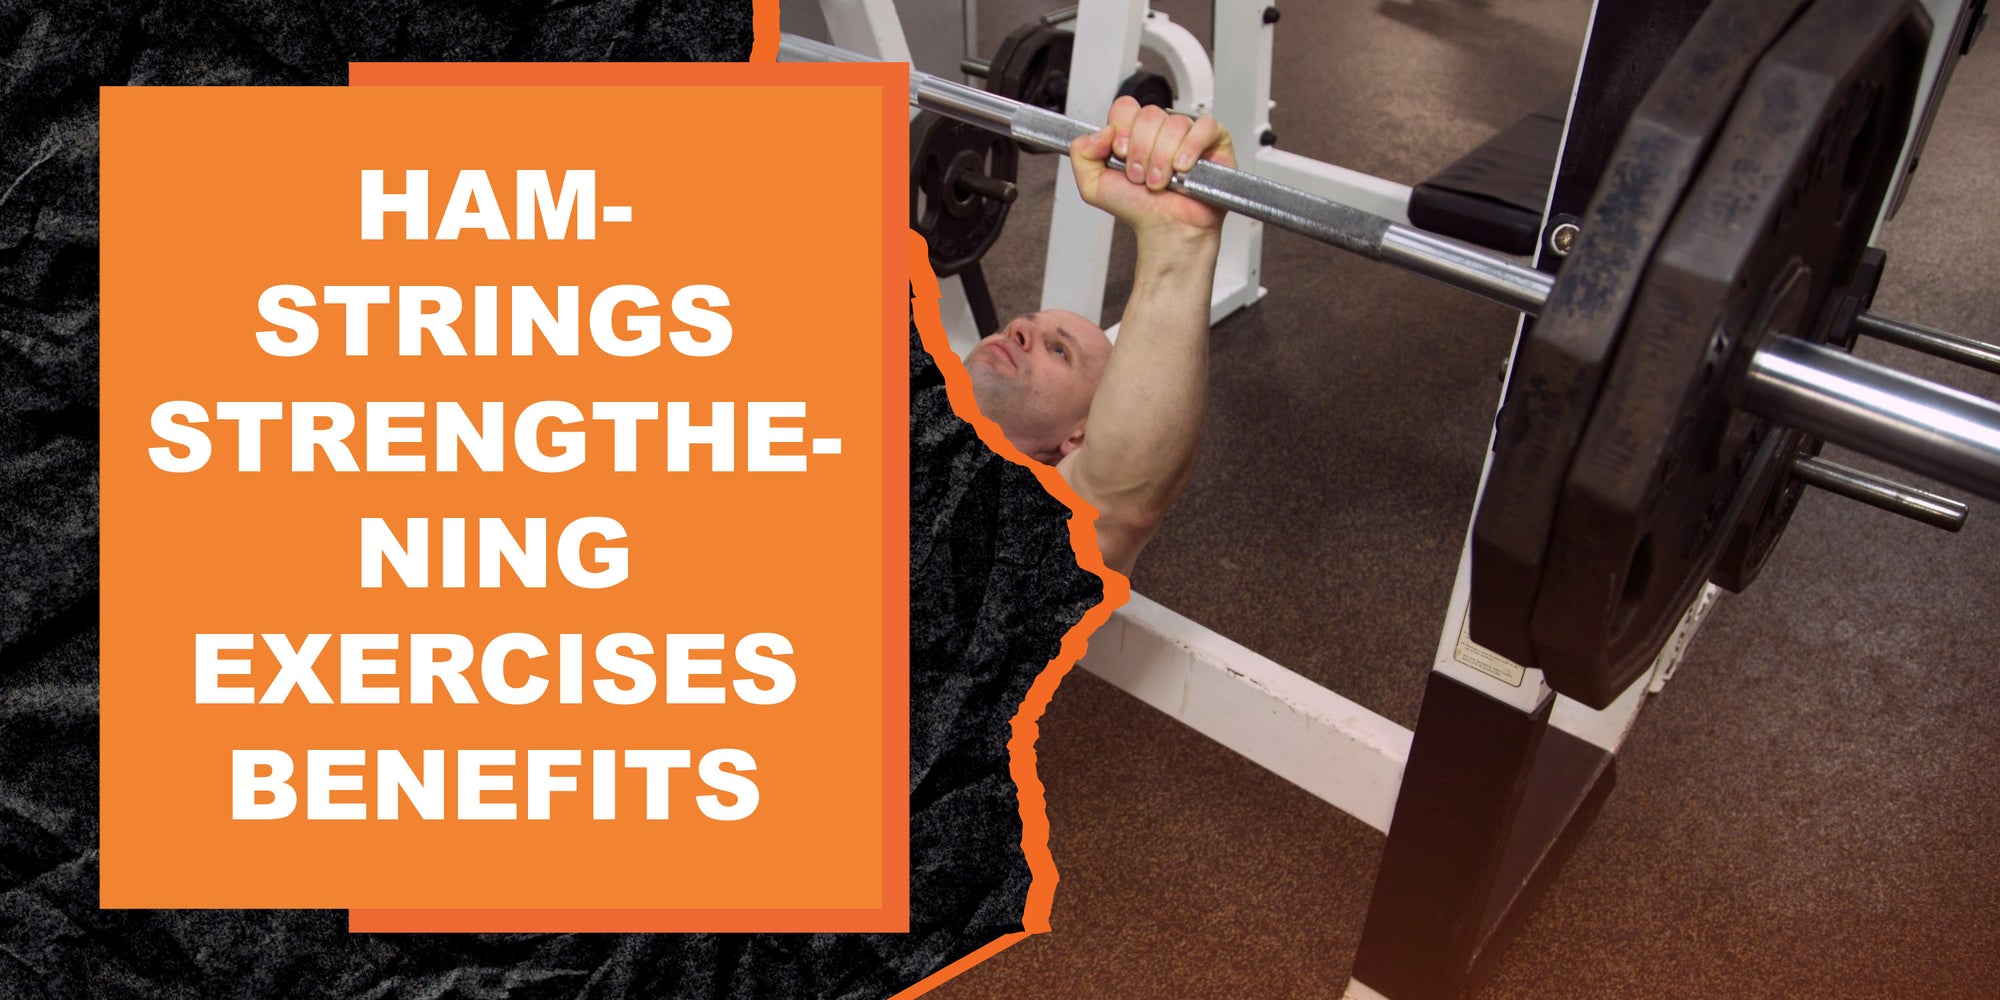 The Benefits of Strengthening the Hamstrings with Exercise